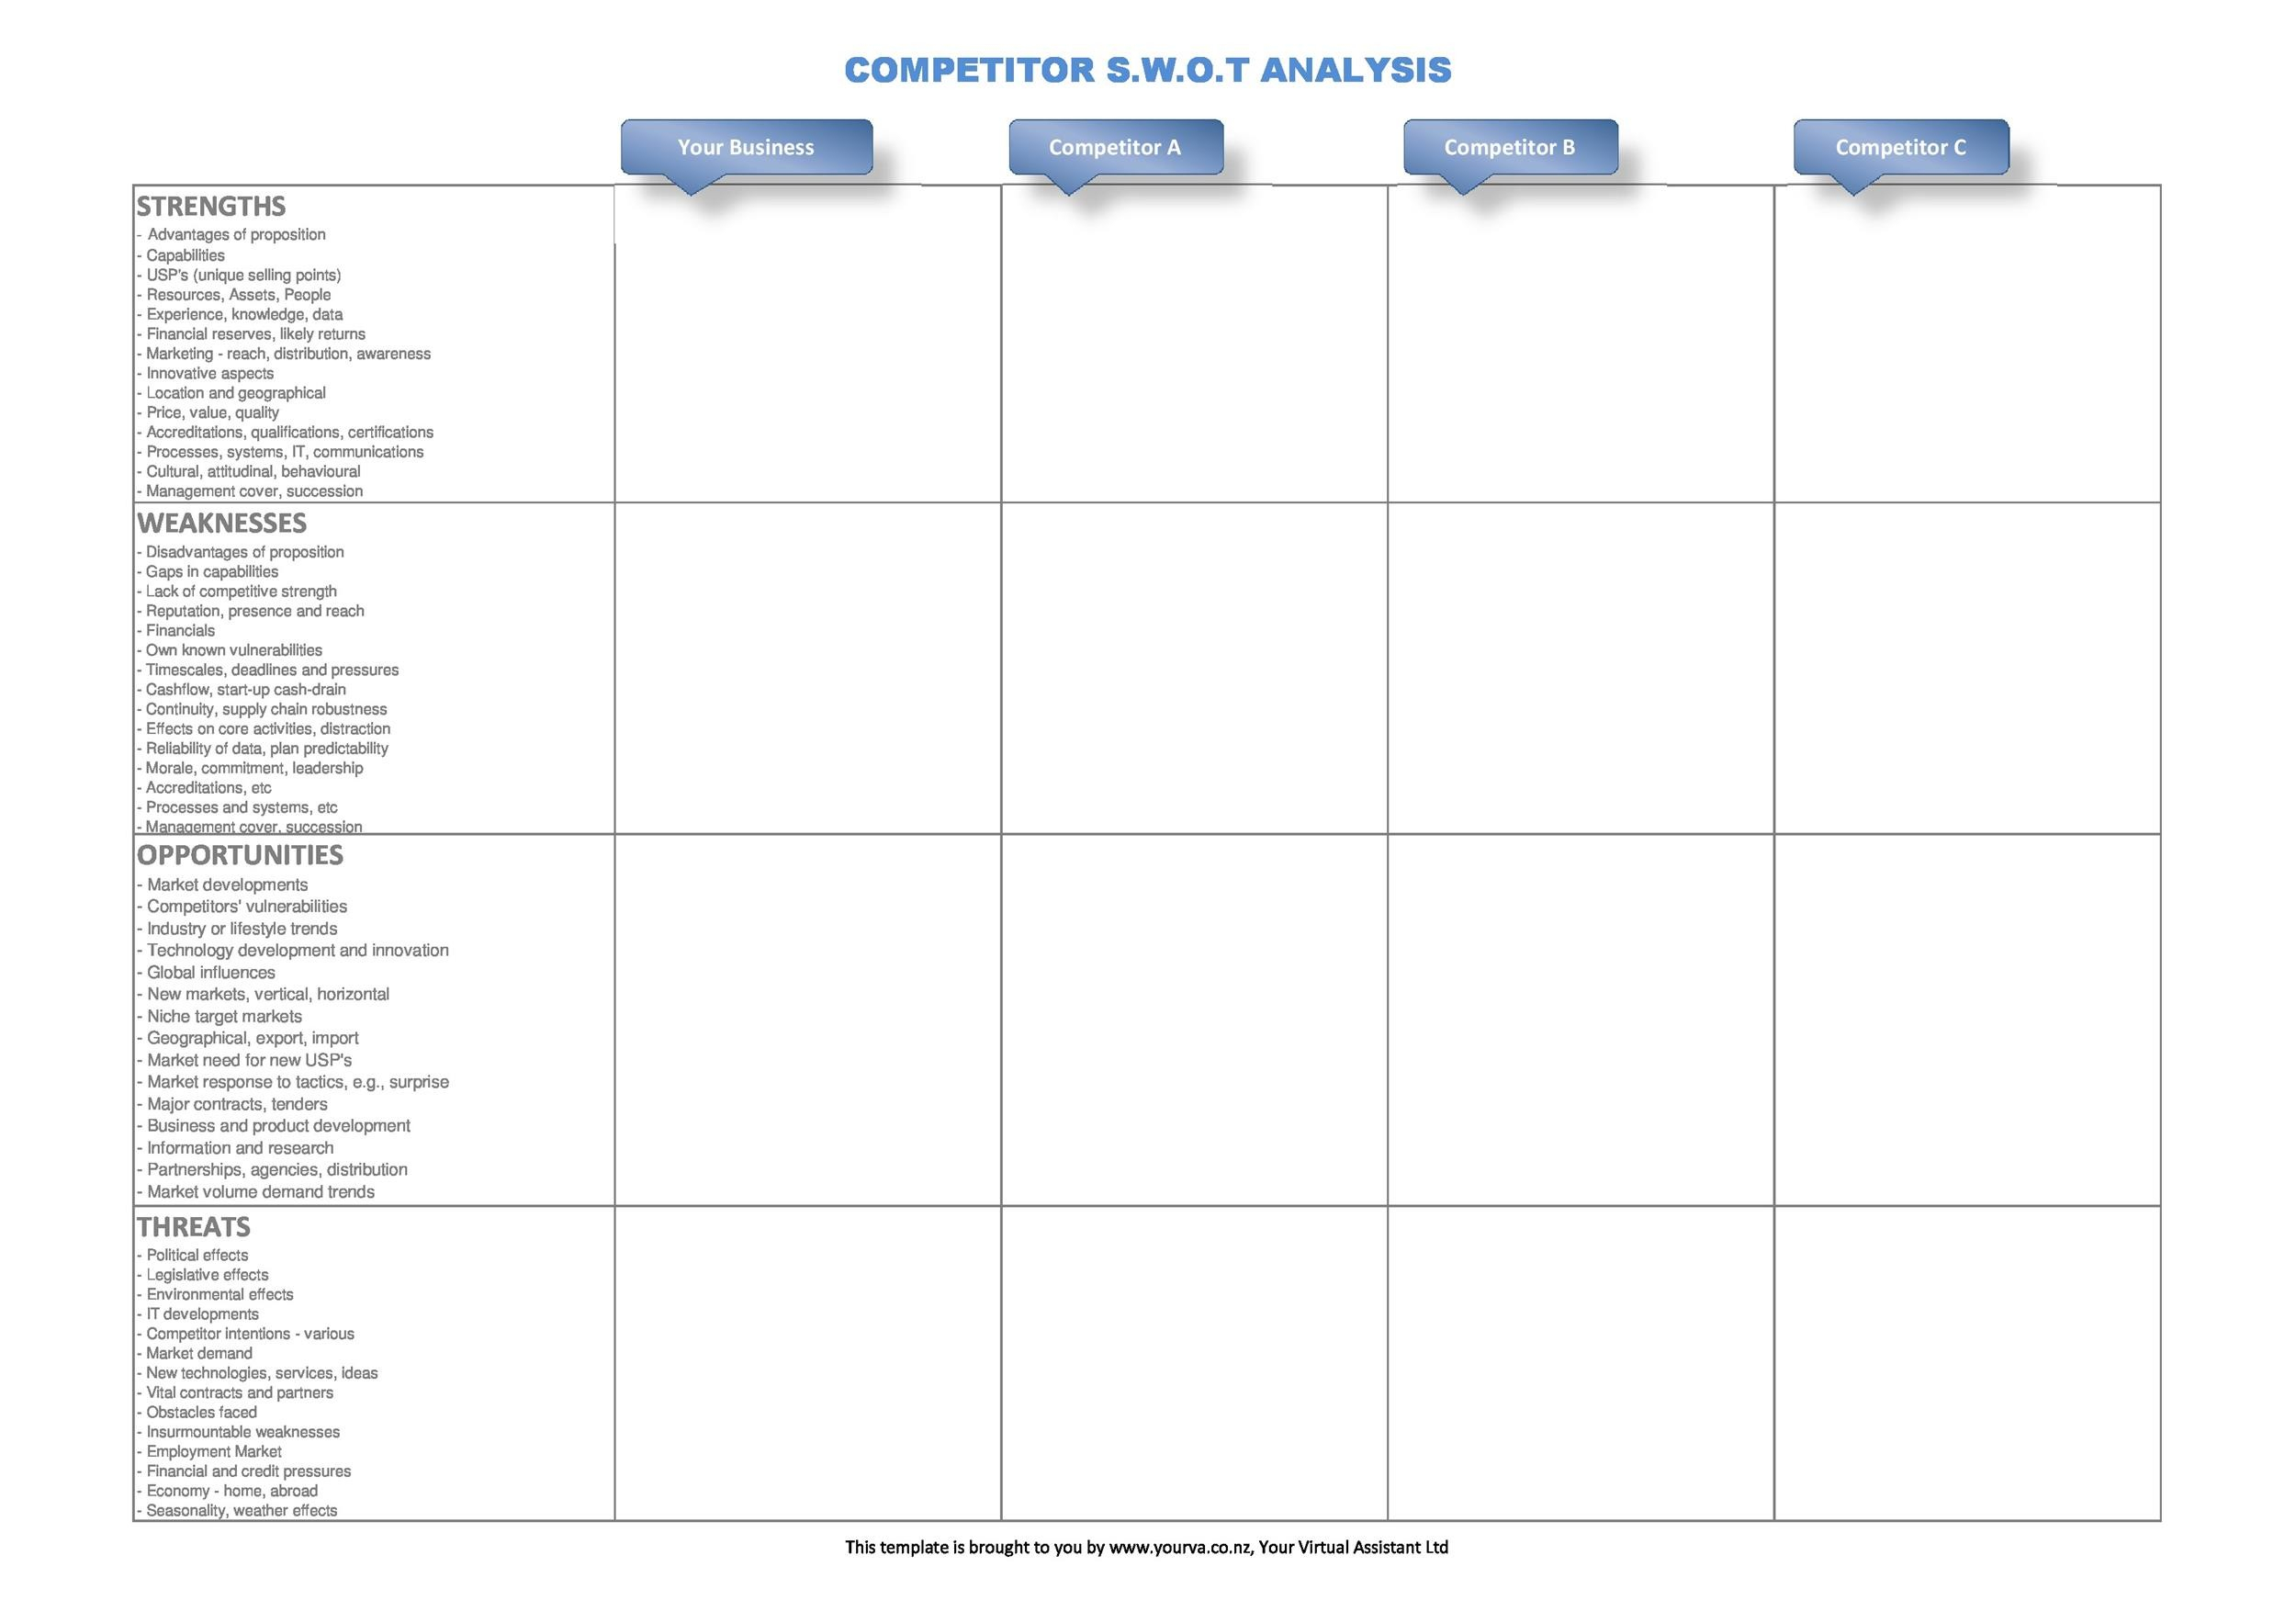 Competitive Analysis Templates - 11 Great Examples [Excel, Word  Inside Competitive Pricing Analysis Template For Competitive Pricing Analysis Template